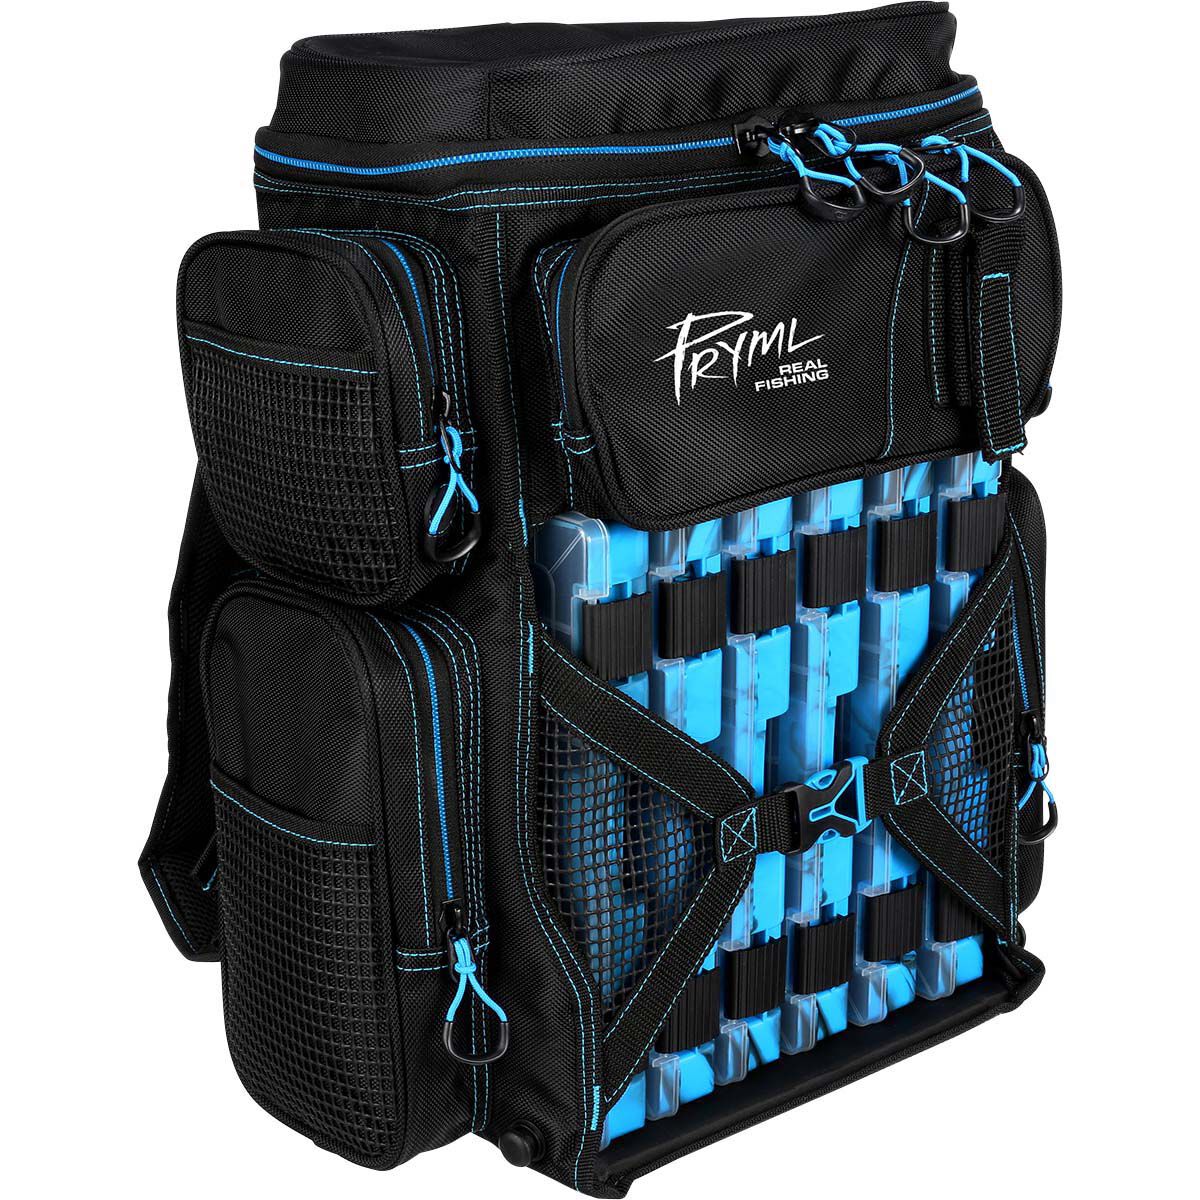 Amazon.com : Piscifun Fishing Tackle Sling Bag with Rod & Gear Holder,  Lightweight Water-Resistant Cross Body Bag with D-Rings and Waist Strap,  Black : Sports & Outdoors